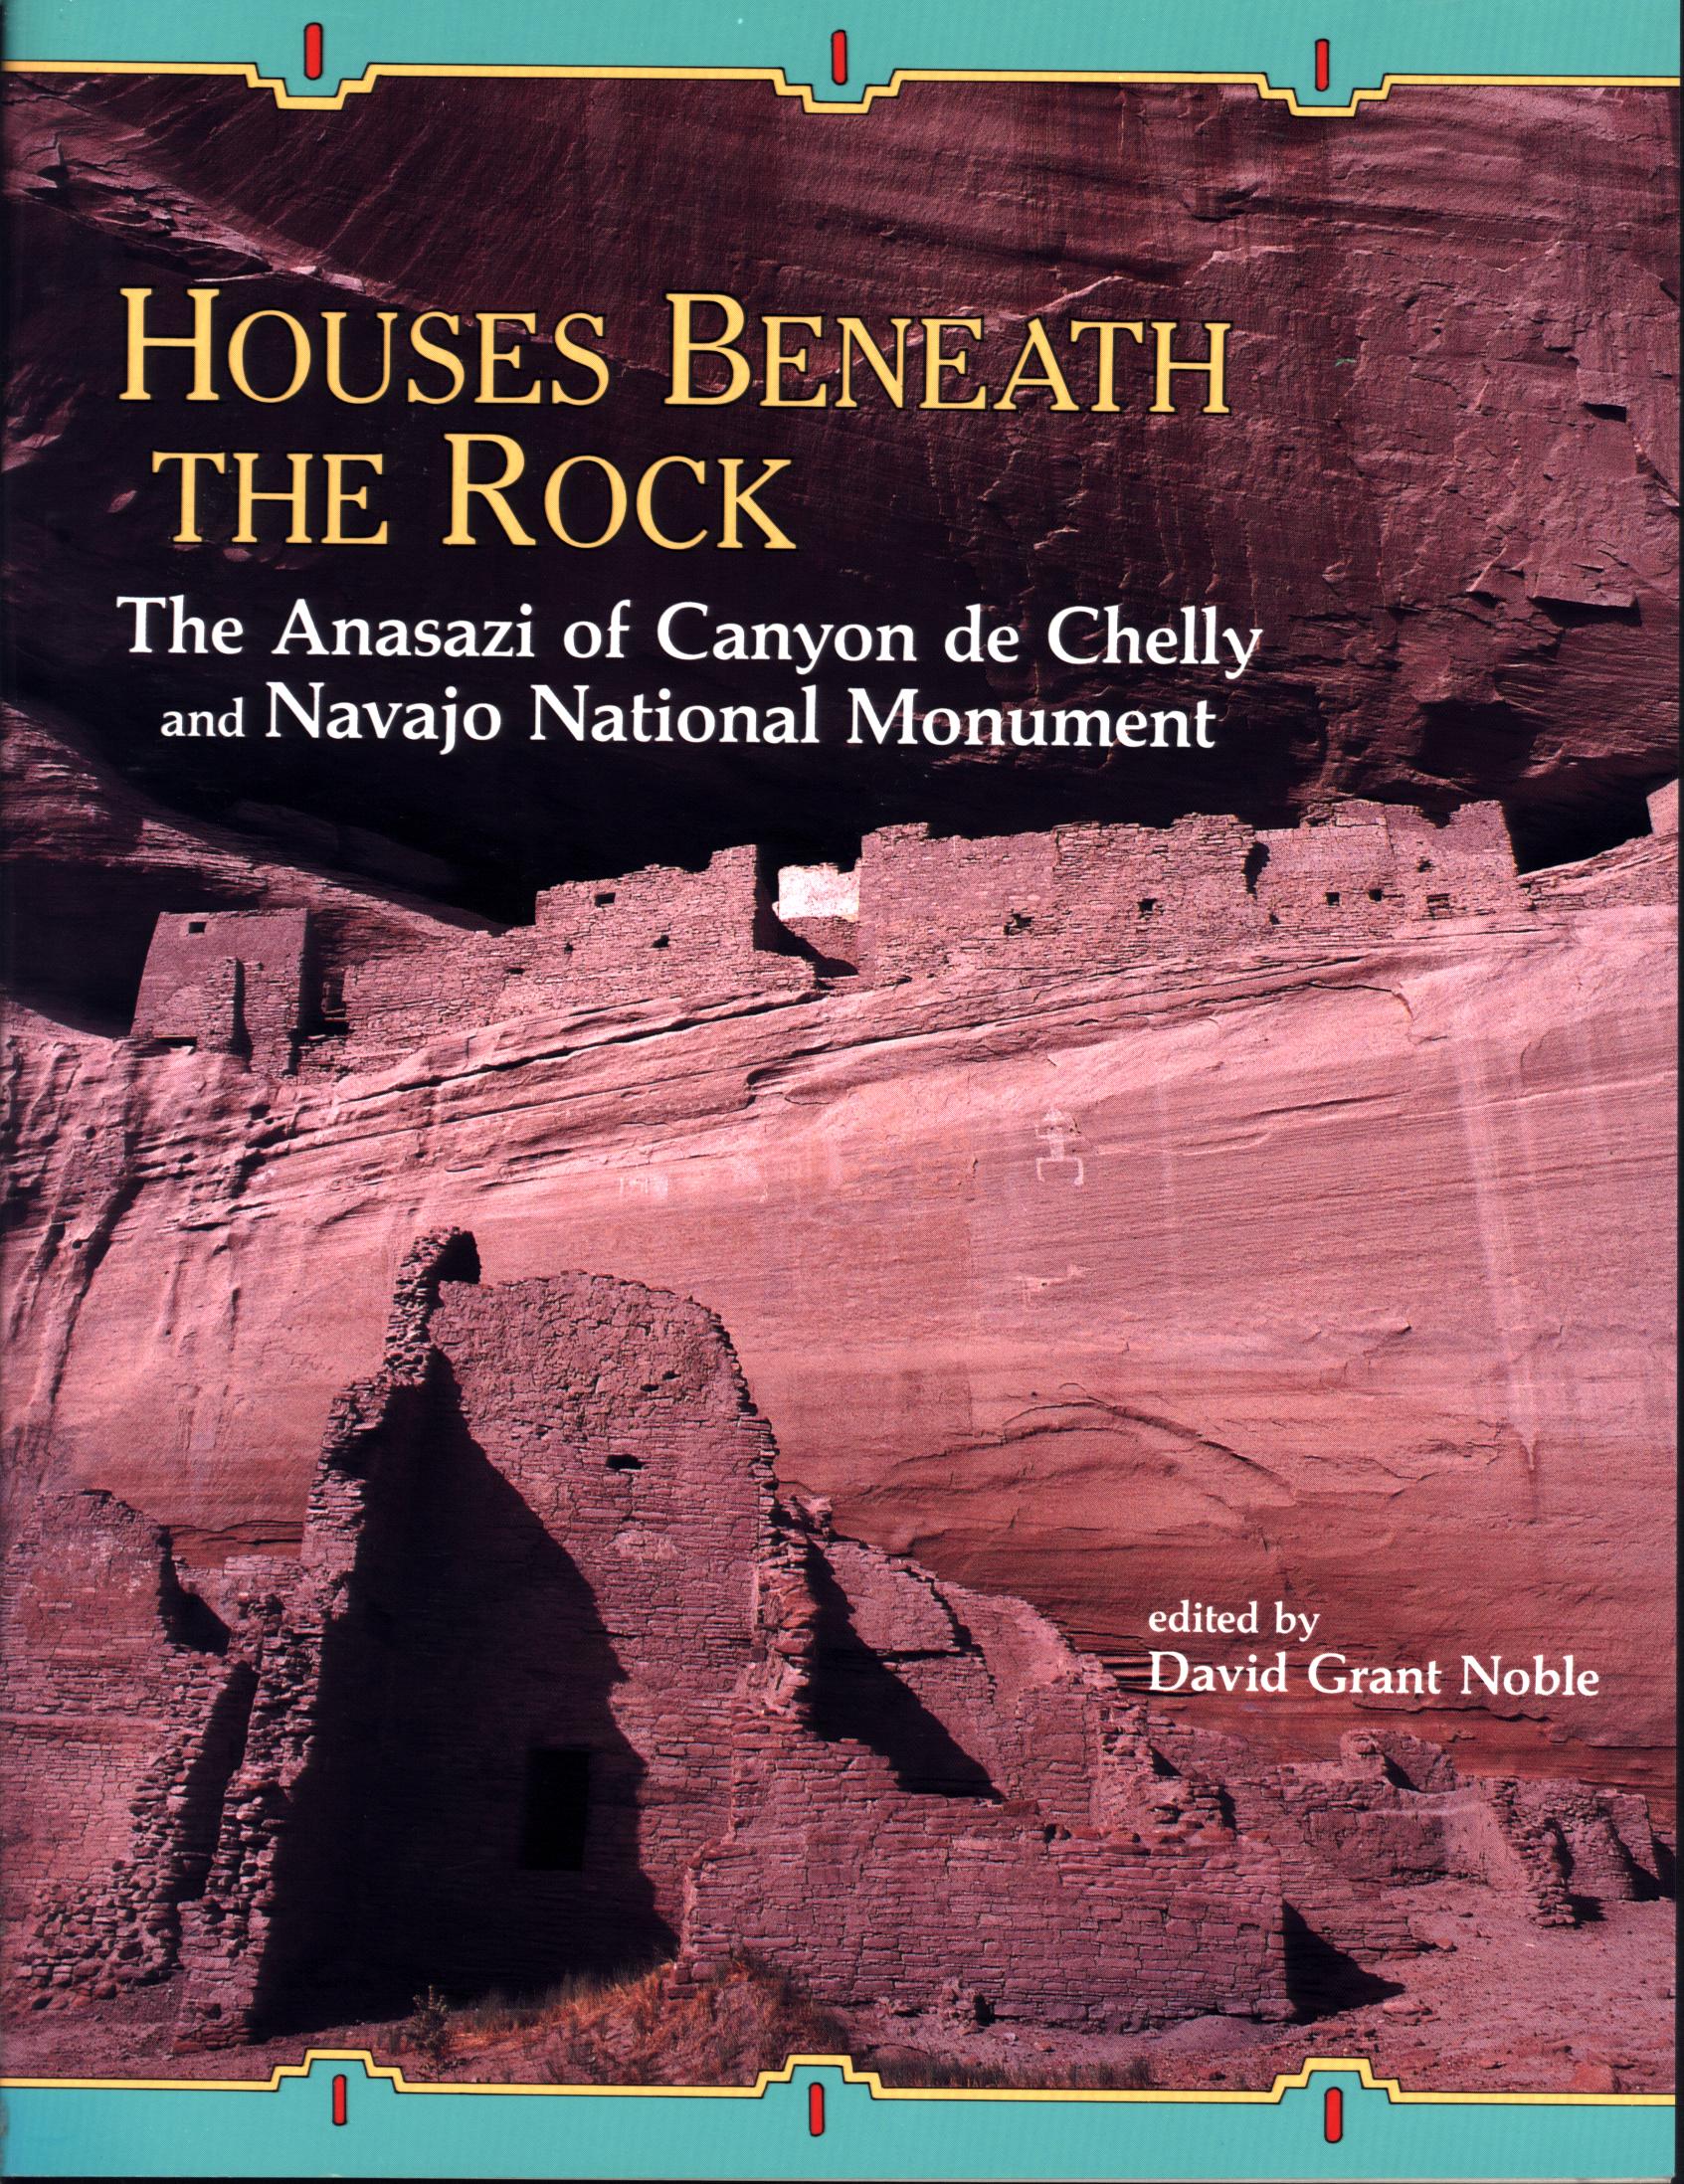 HOUSES BENEATH THE ROCK: the Anasazi of Canyon de Chelly and Navajo National Monument.